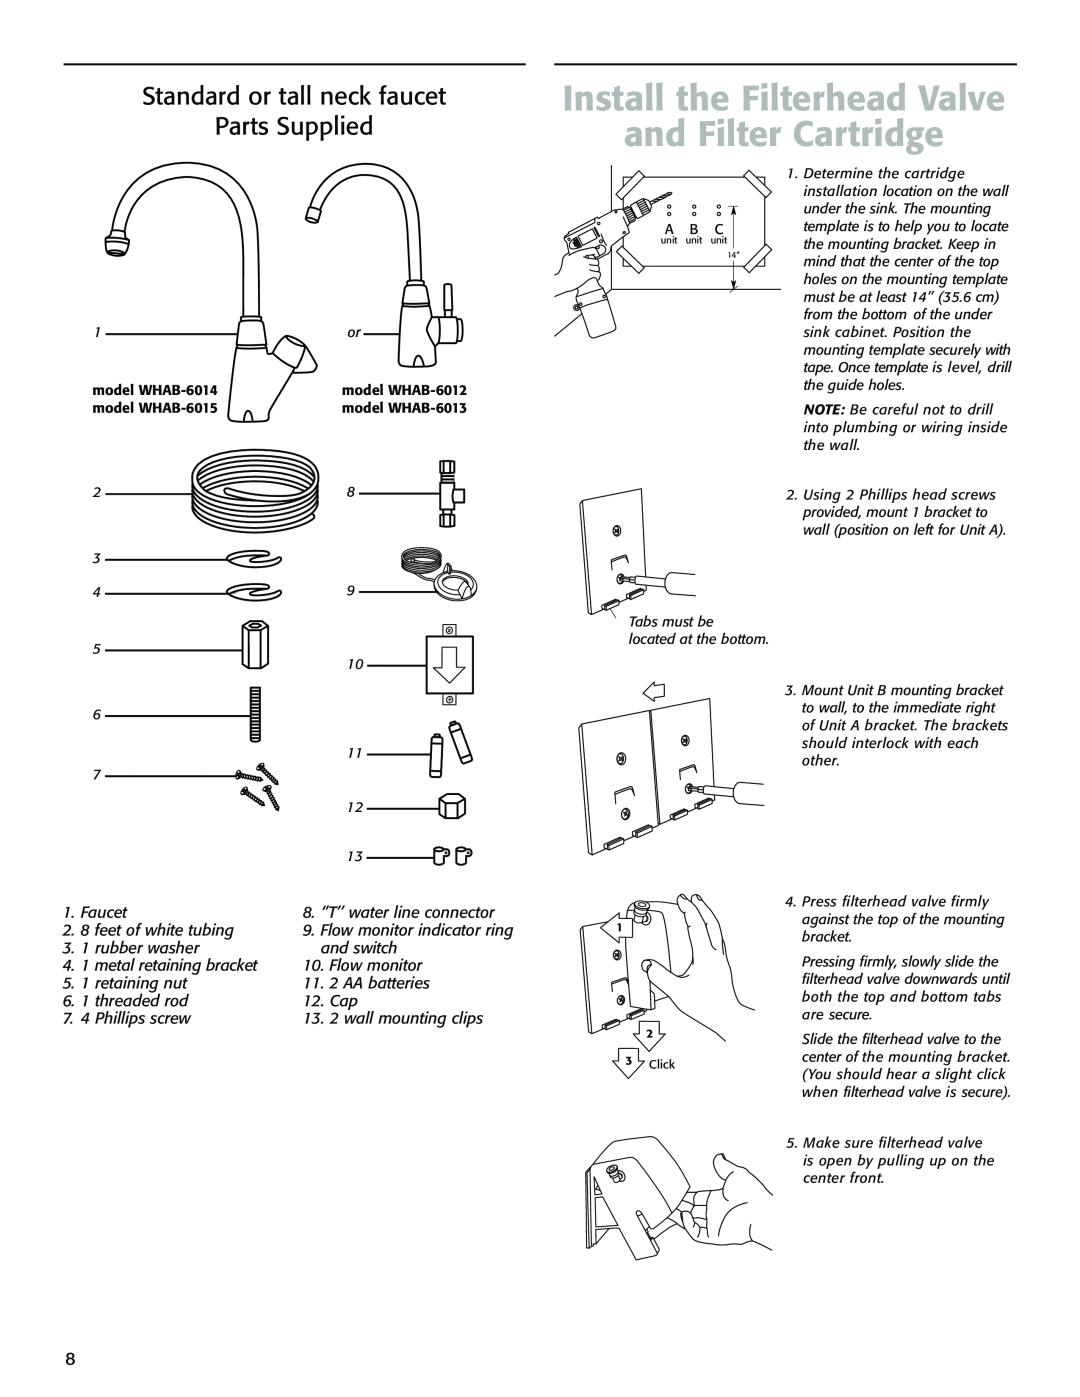 Whirlpool WHAB-6014 Install the Filterhead Valve and Filter Cartridge, Standard or tall neck faucet Parts Supplied 